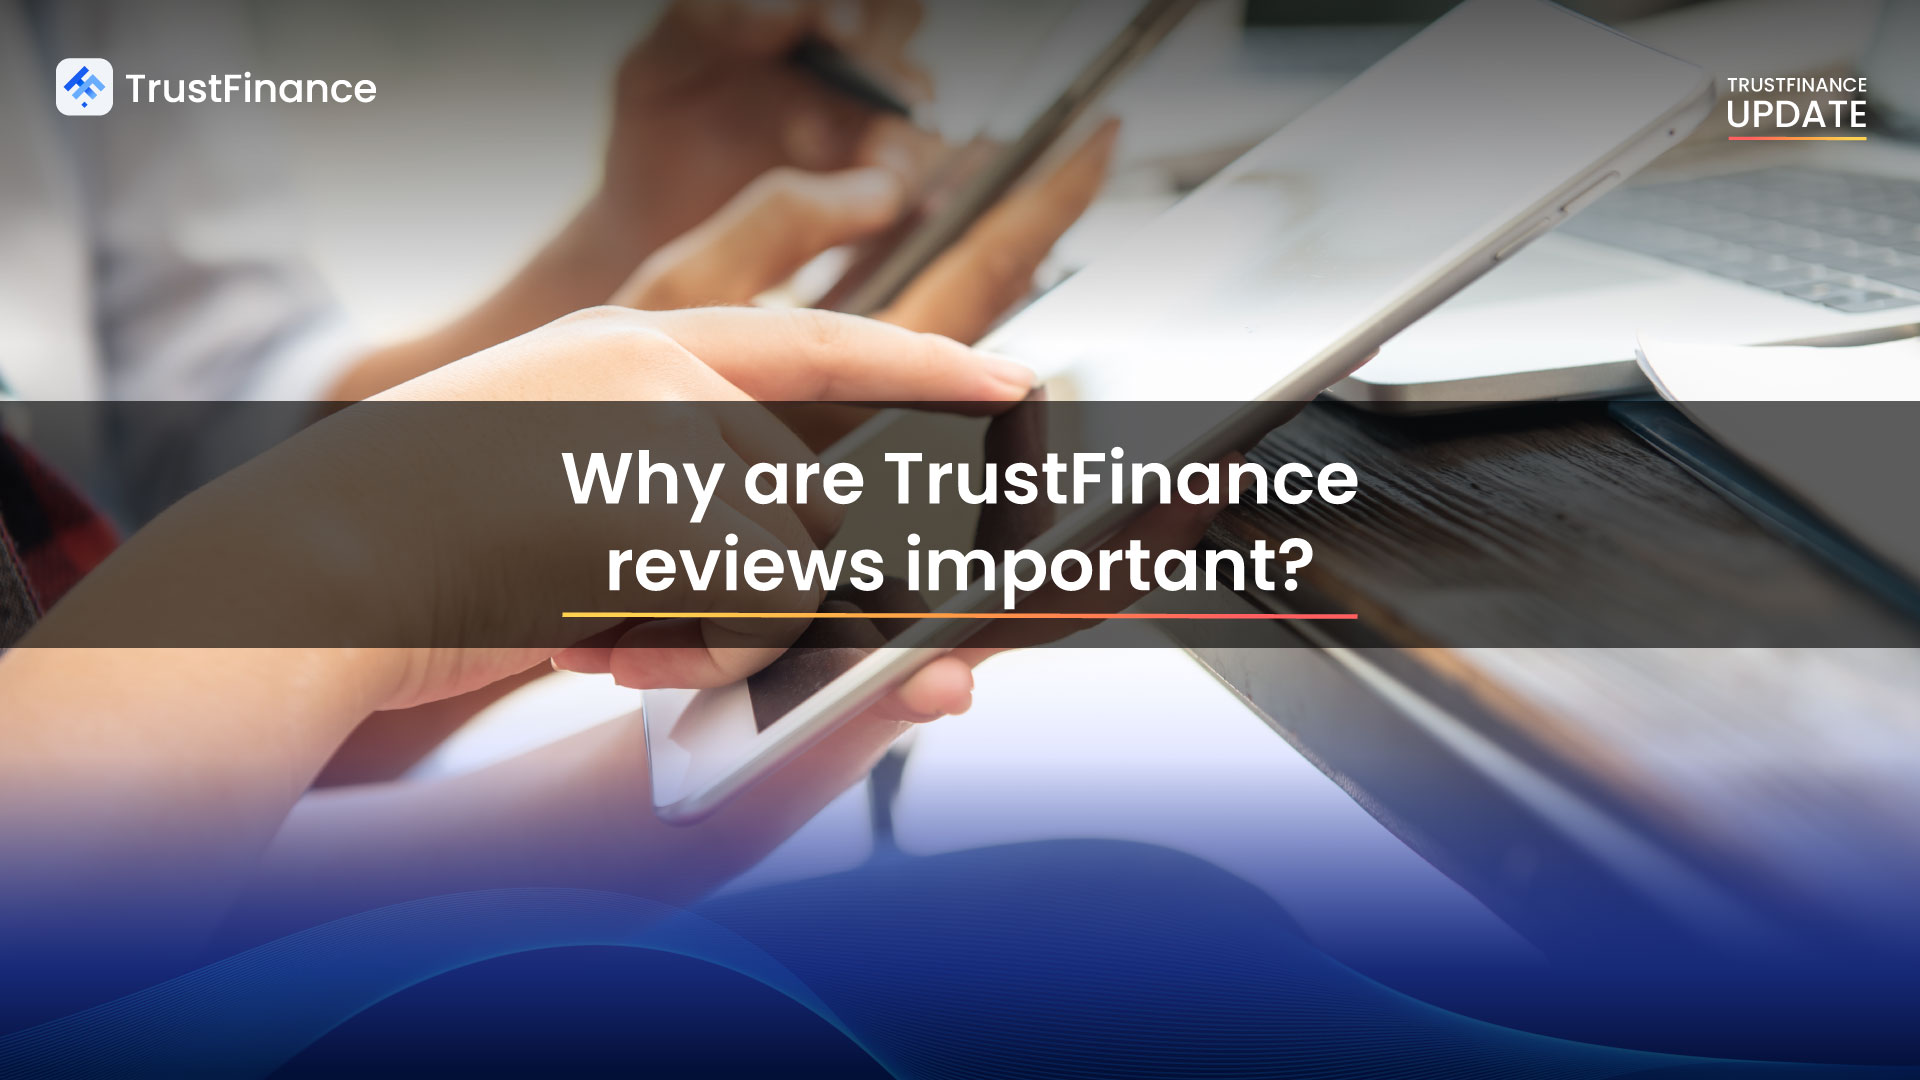 Why are TrustFinance reviews important?